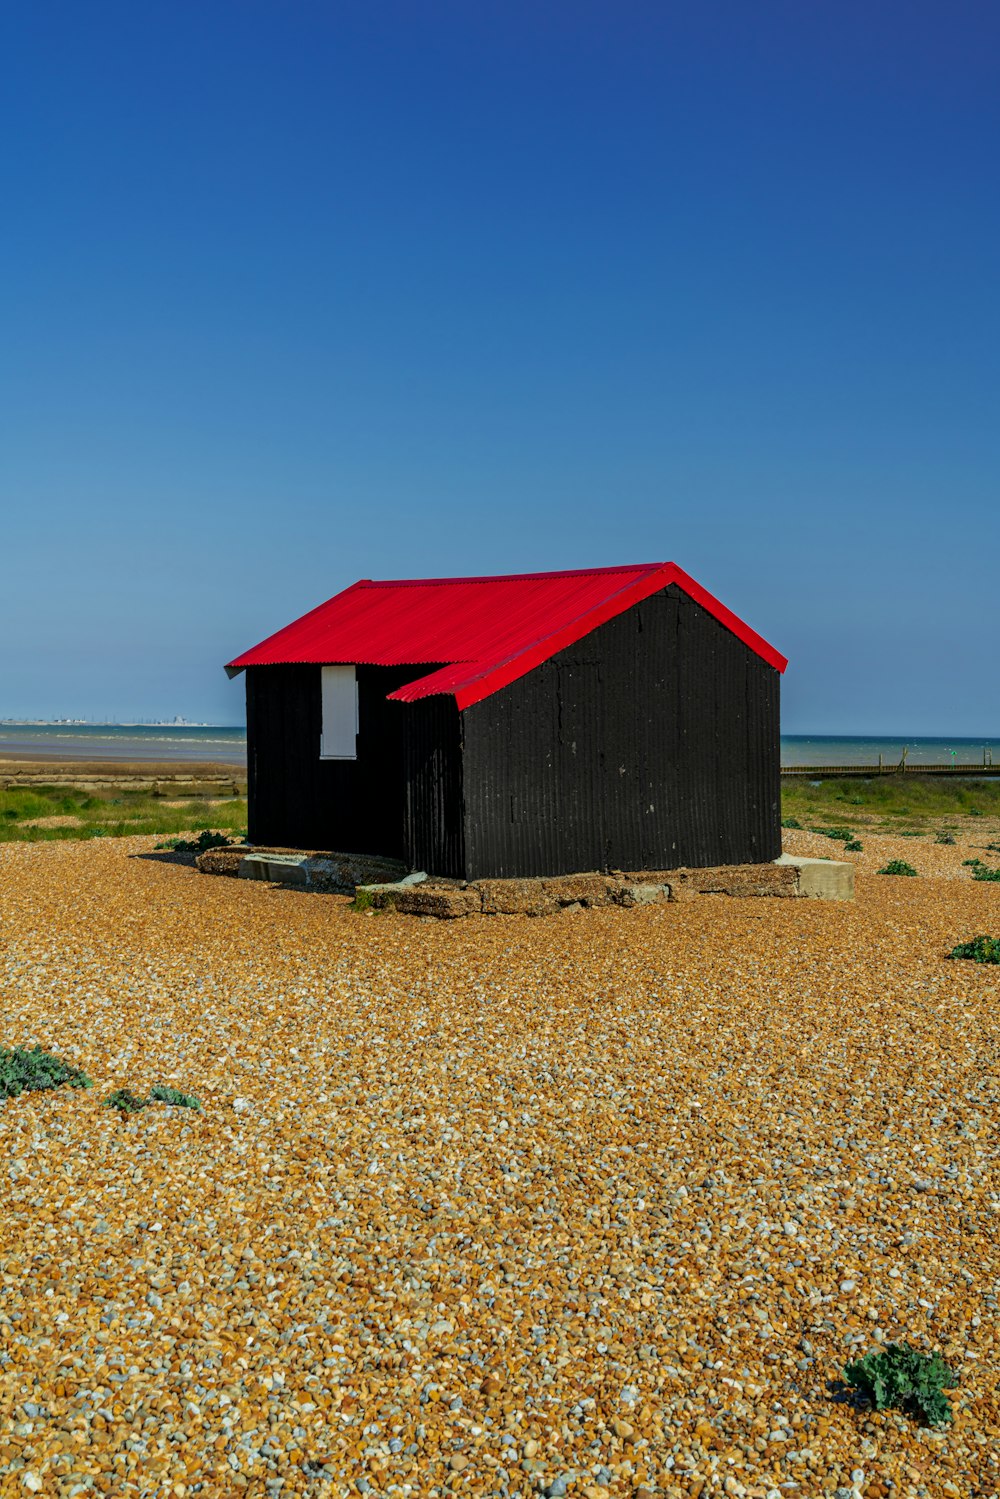 red wooden house on brown field under blue sky during daytime